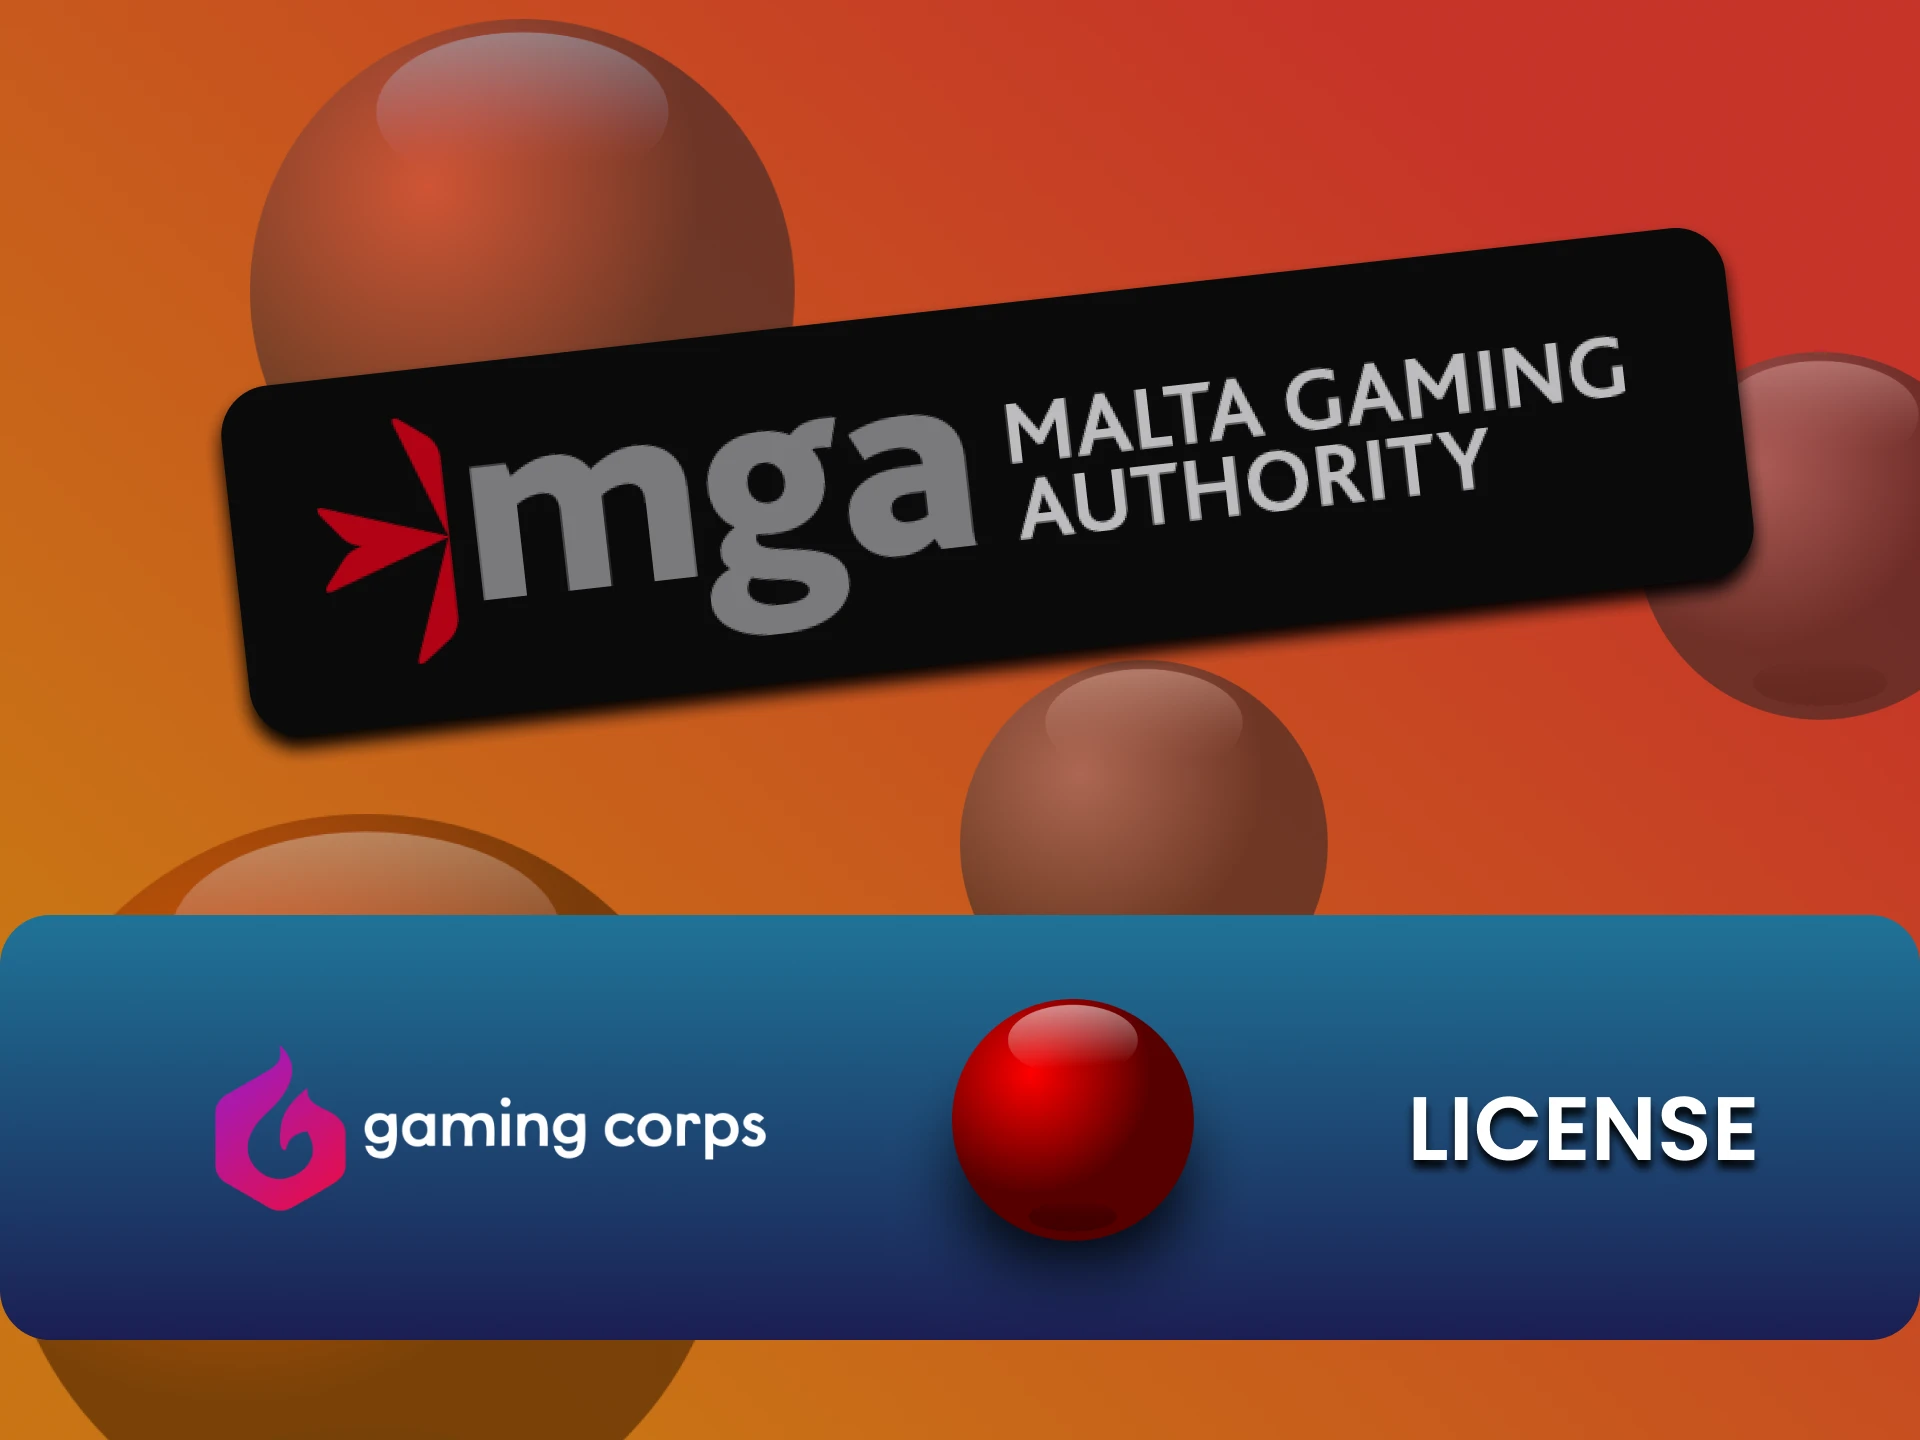 Gaming Corps has a special license.